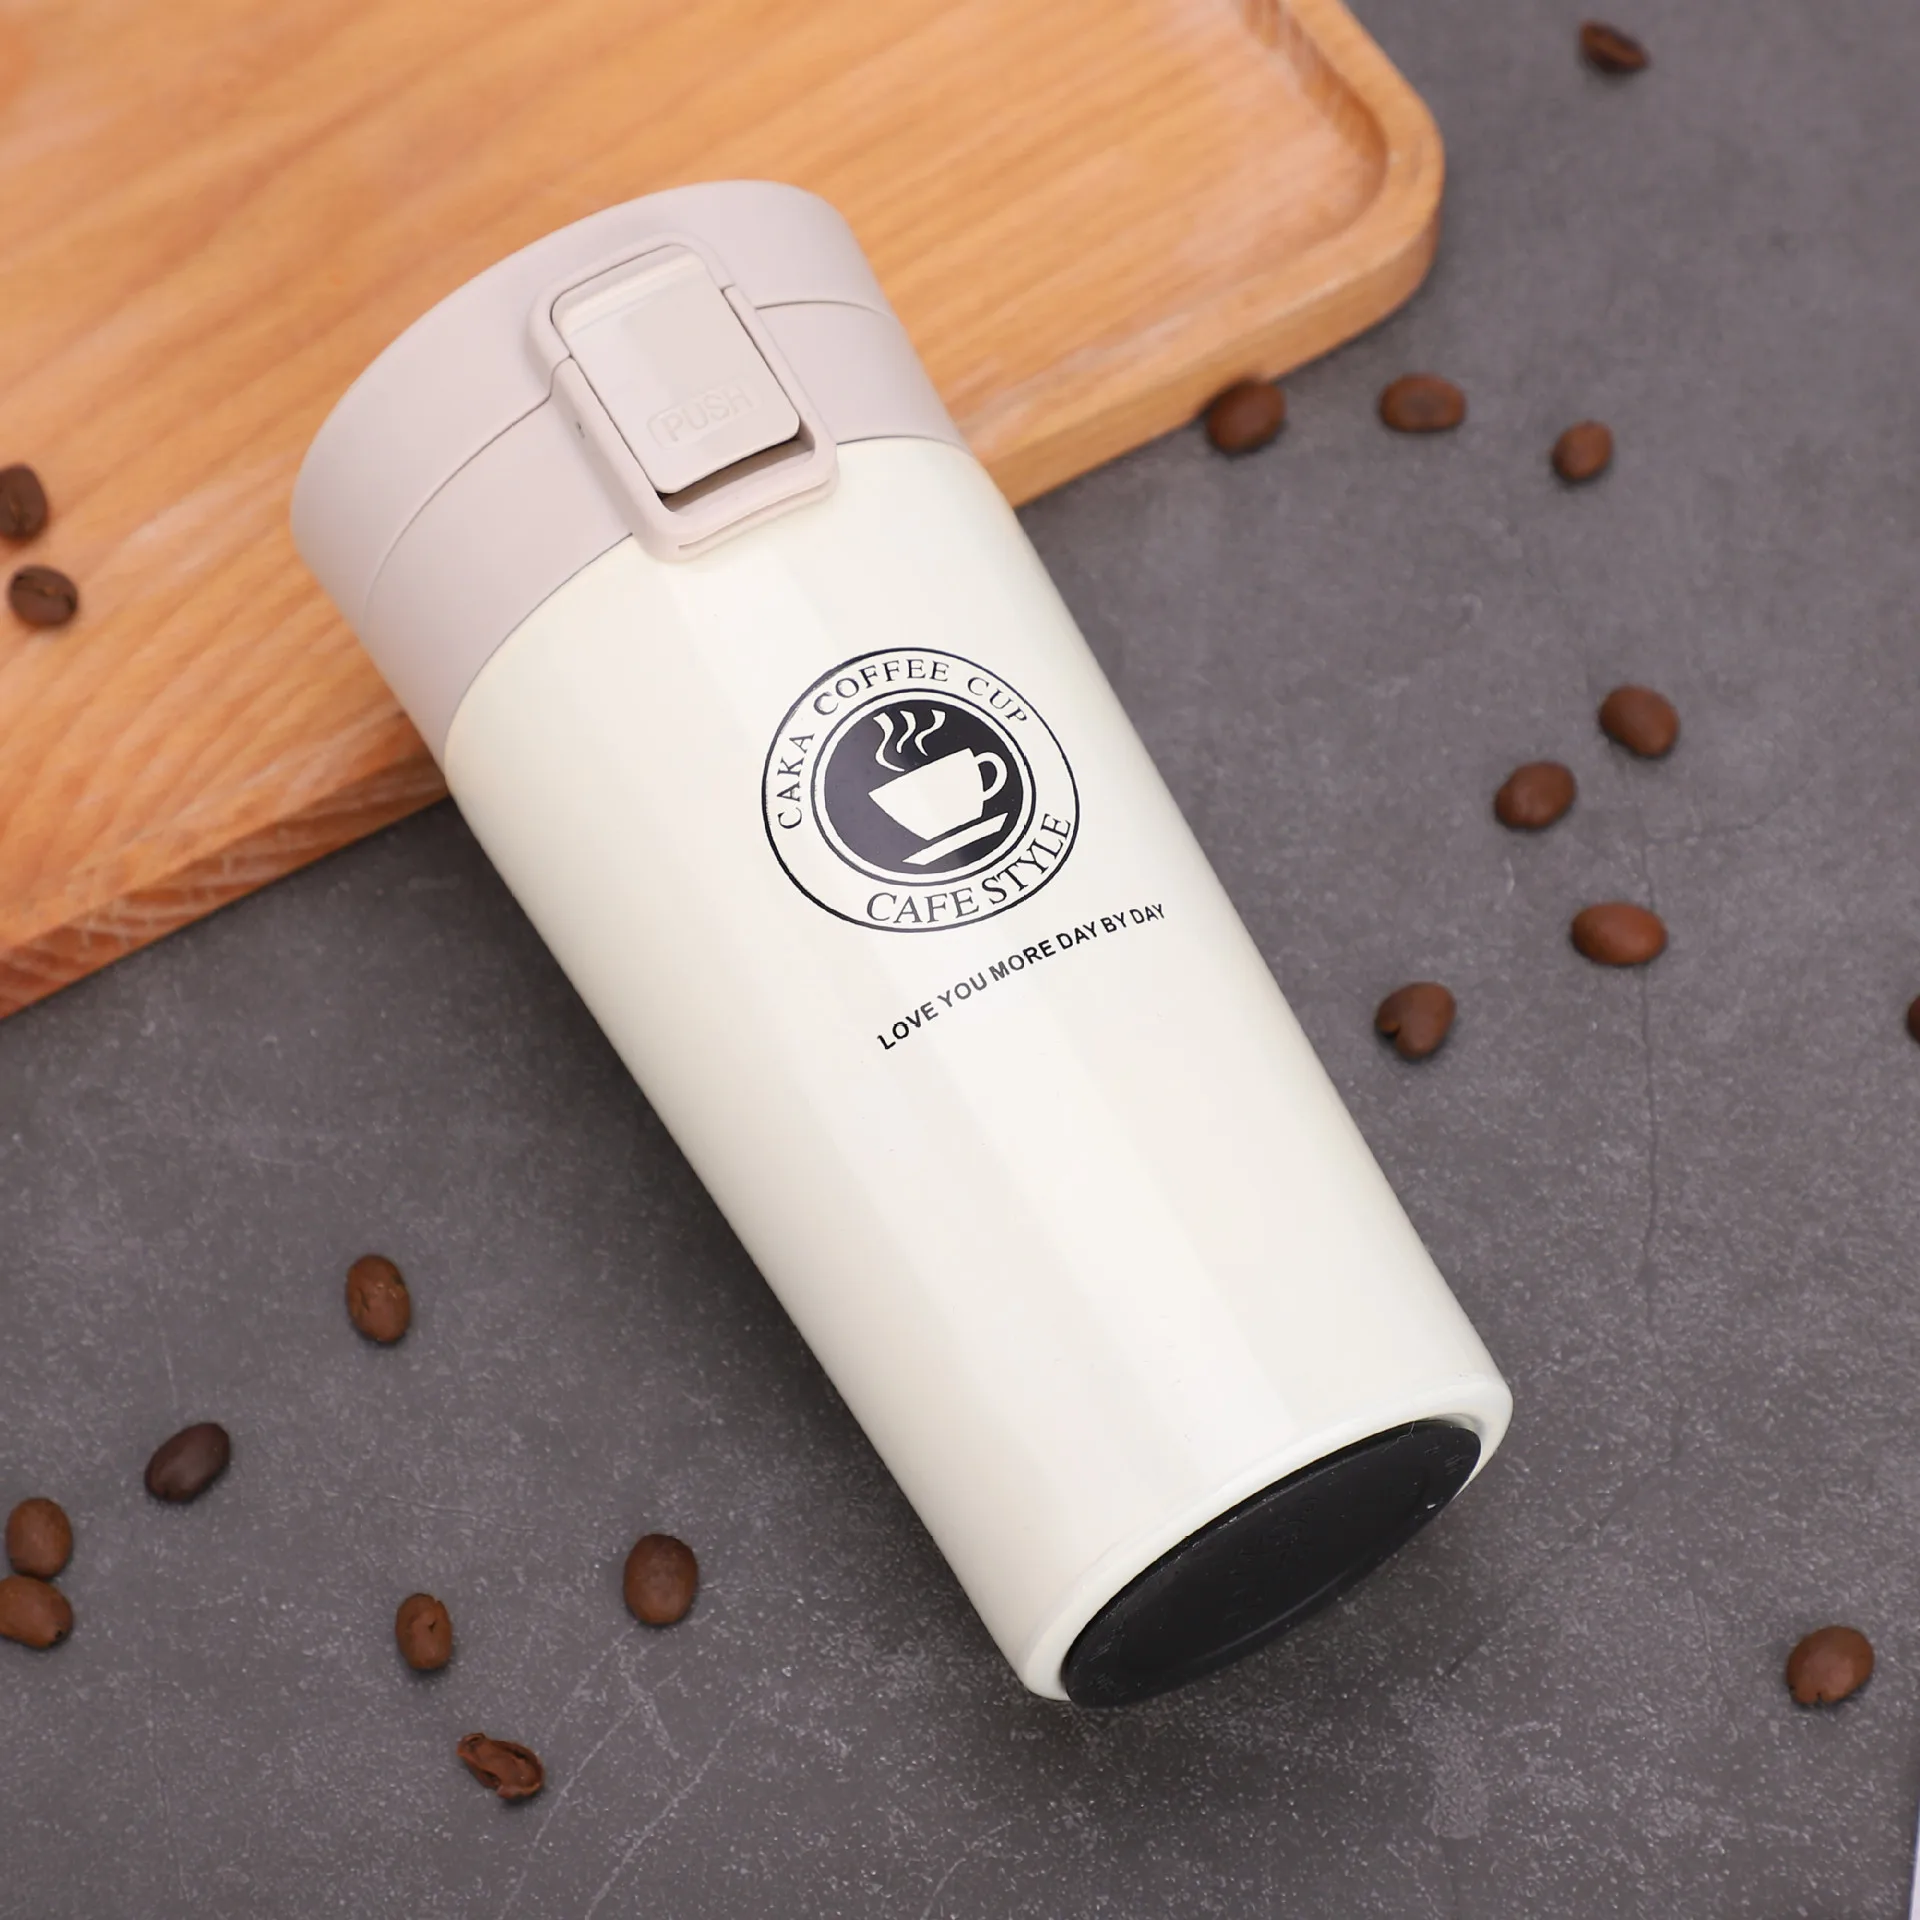 Hot Premium Travel Coffee Mug Stainless Steel Thermos Tumbler Cups Vacuum  Flask Thermo Water Bottle Tea Mug Thermocup Bottle - Vacuum Flasks &  Thermoses - AliExpress